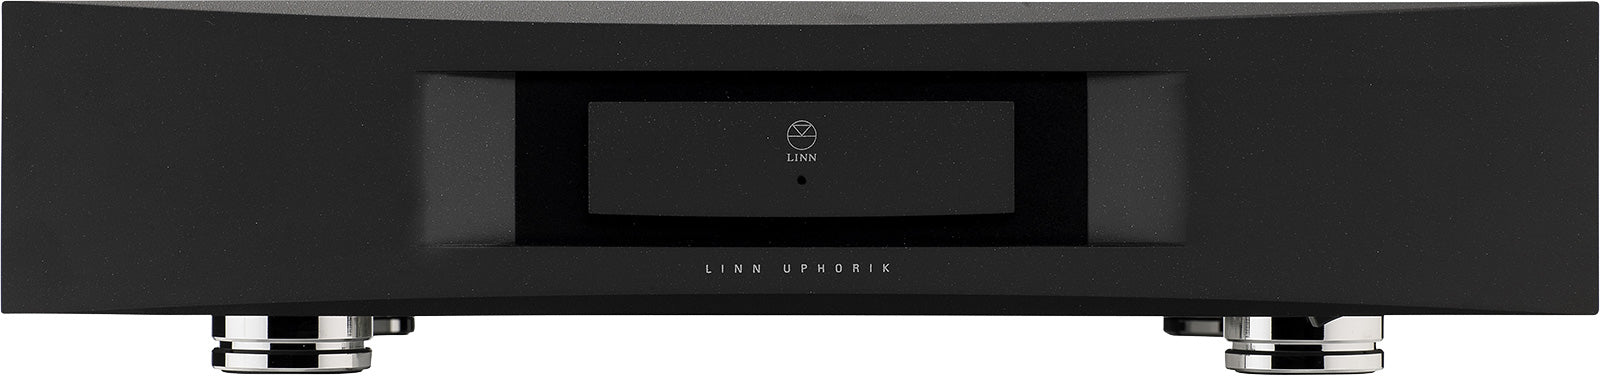 Linn Uphorik MM and MC Phono Stages.